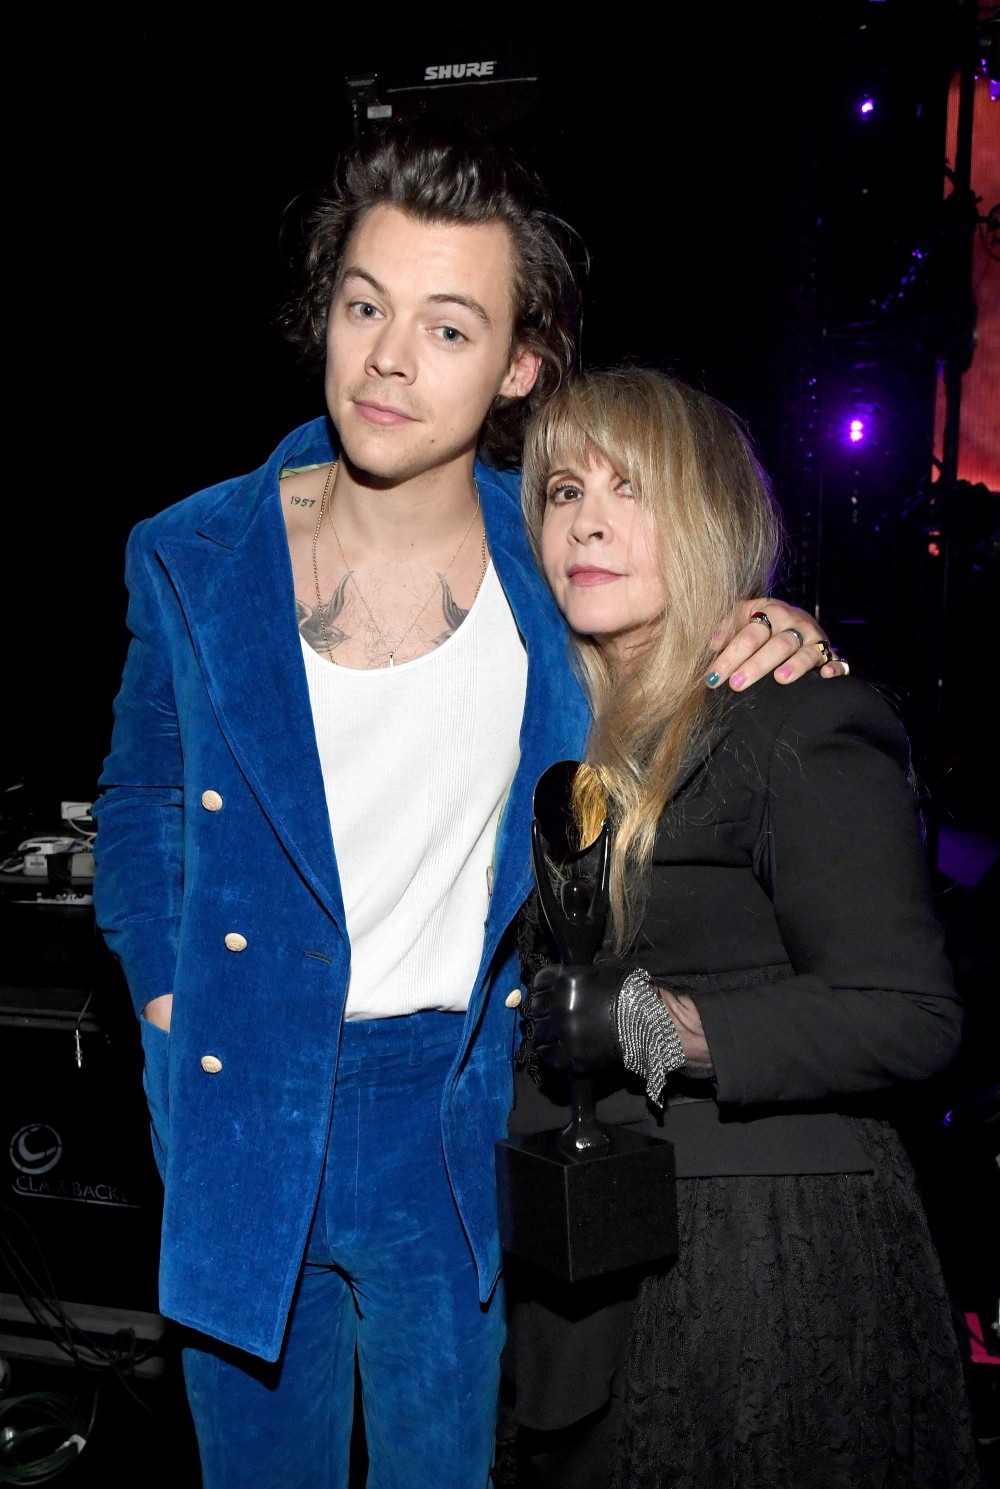 Harry attended Stevie's Rock & Roll Hall Of Fame Induction in New York City in 2019. She has described him as 'the son I never had'